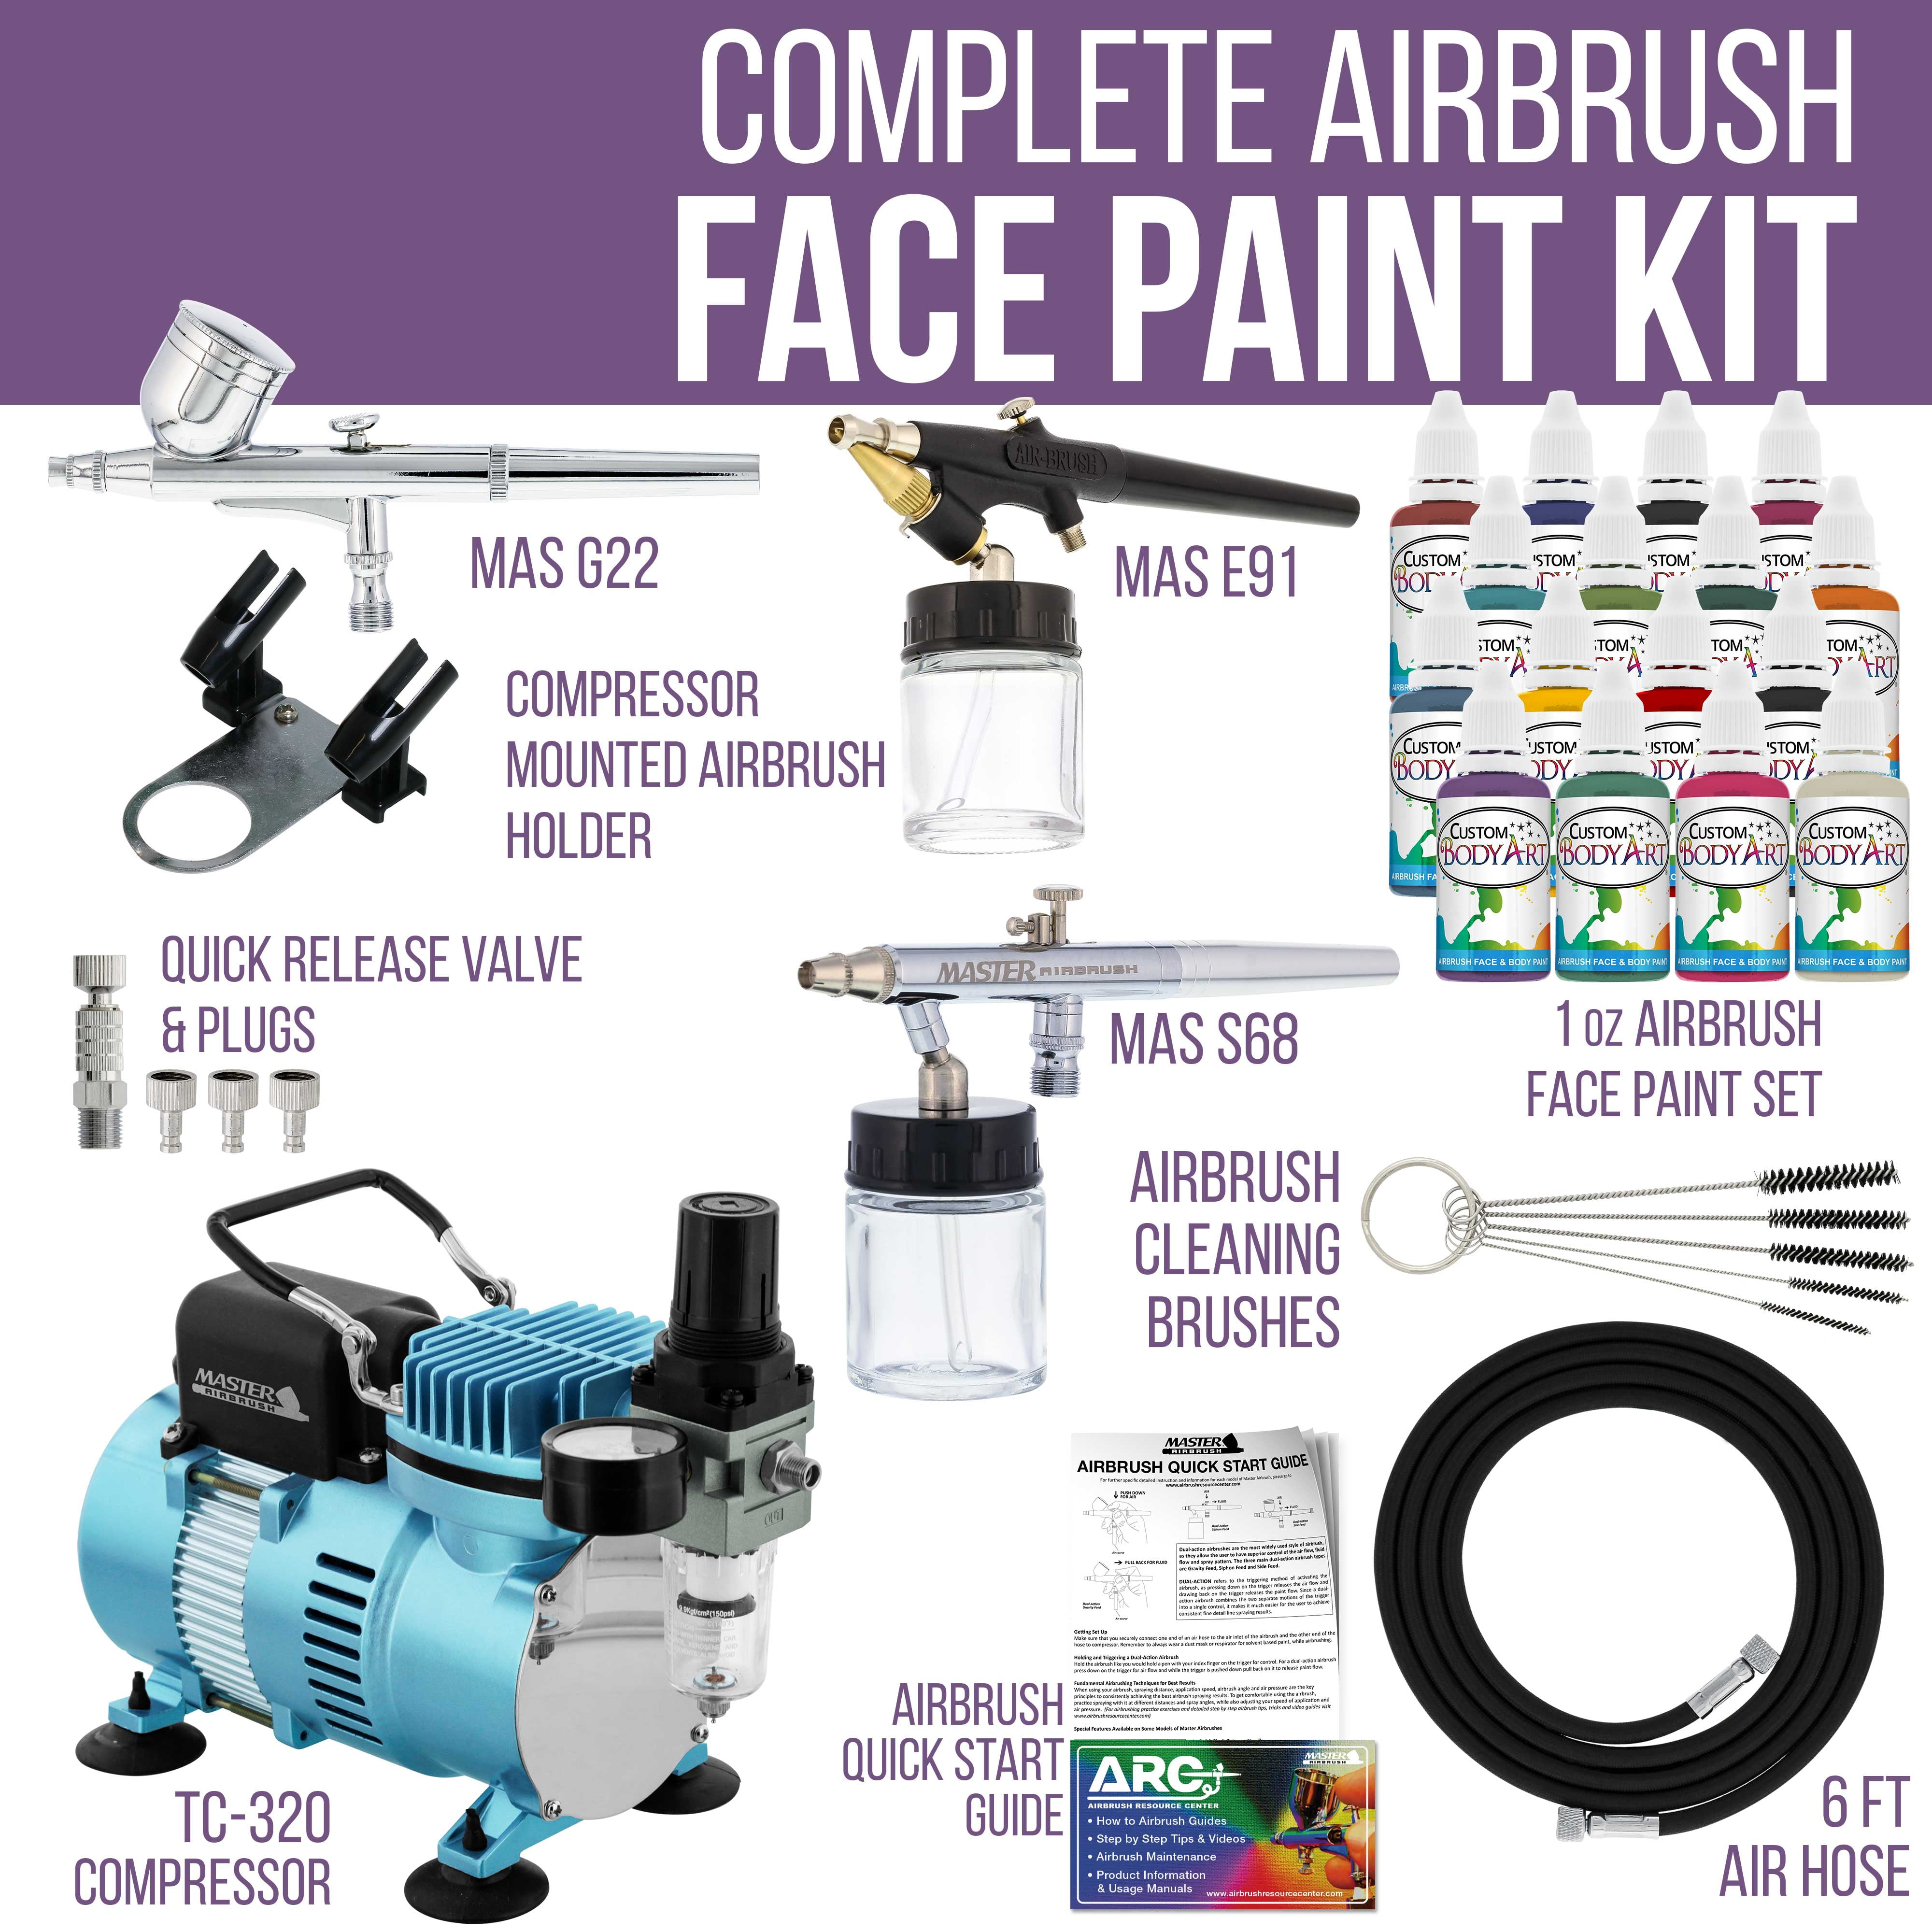 Master Airbrush KIT-SP19-20 Art Airbrushing System Paint Kit with Standard Compressor (11 Items)